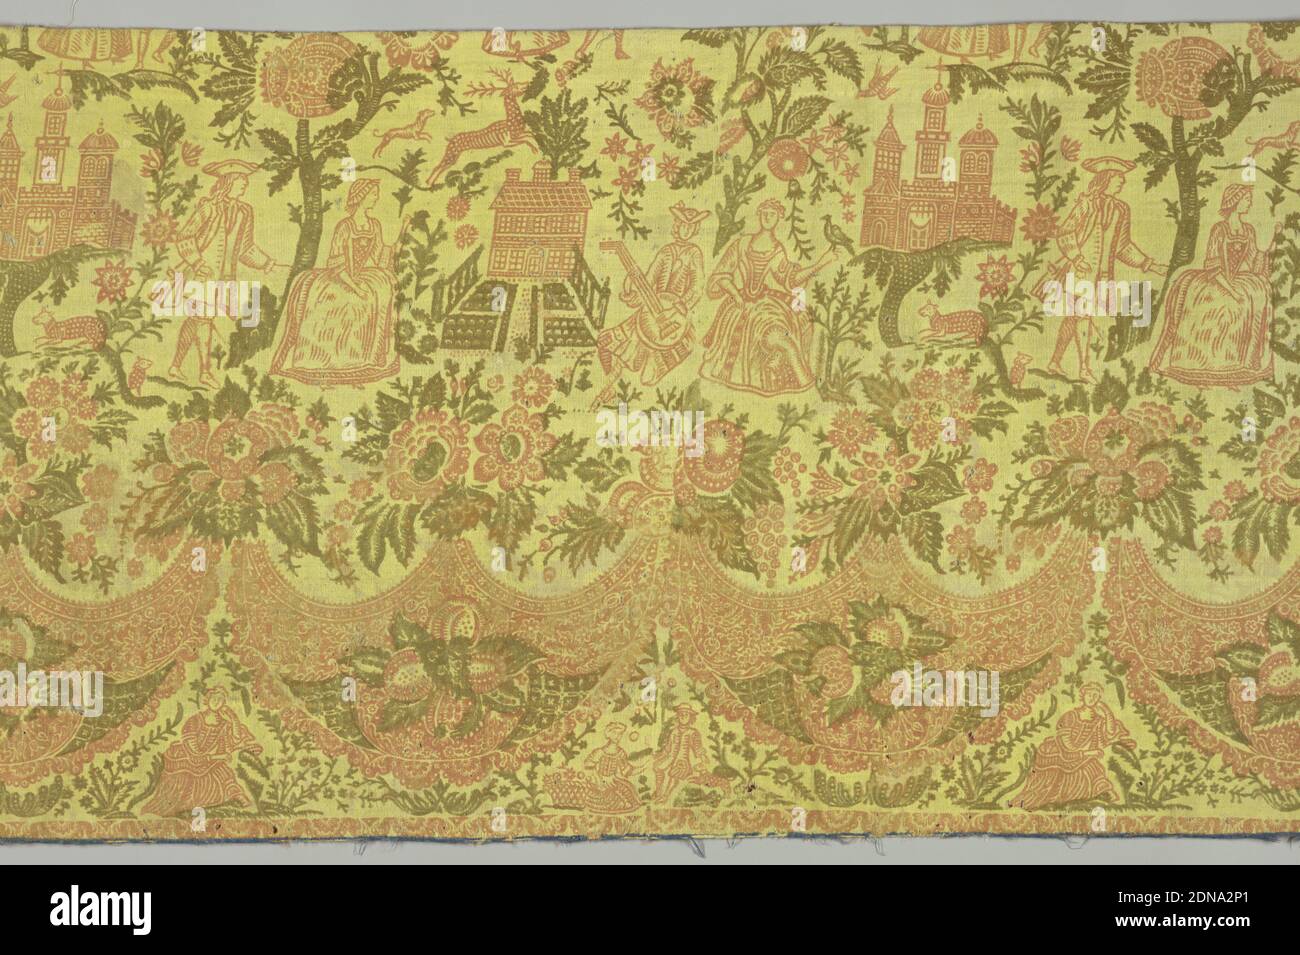 Textile, Medium: wool Technique: printed on twill weave, Panel of yellow wool serge printed in orange red and olive green. Architectural monuments, large scale men and women, and dog chasing a stag among floering trees. Border a festoon of flowers and human figures., Europe, 18th century, printed, dyed & painted textiles, Textile Stock Photo